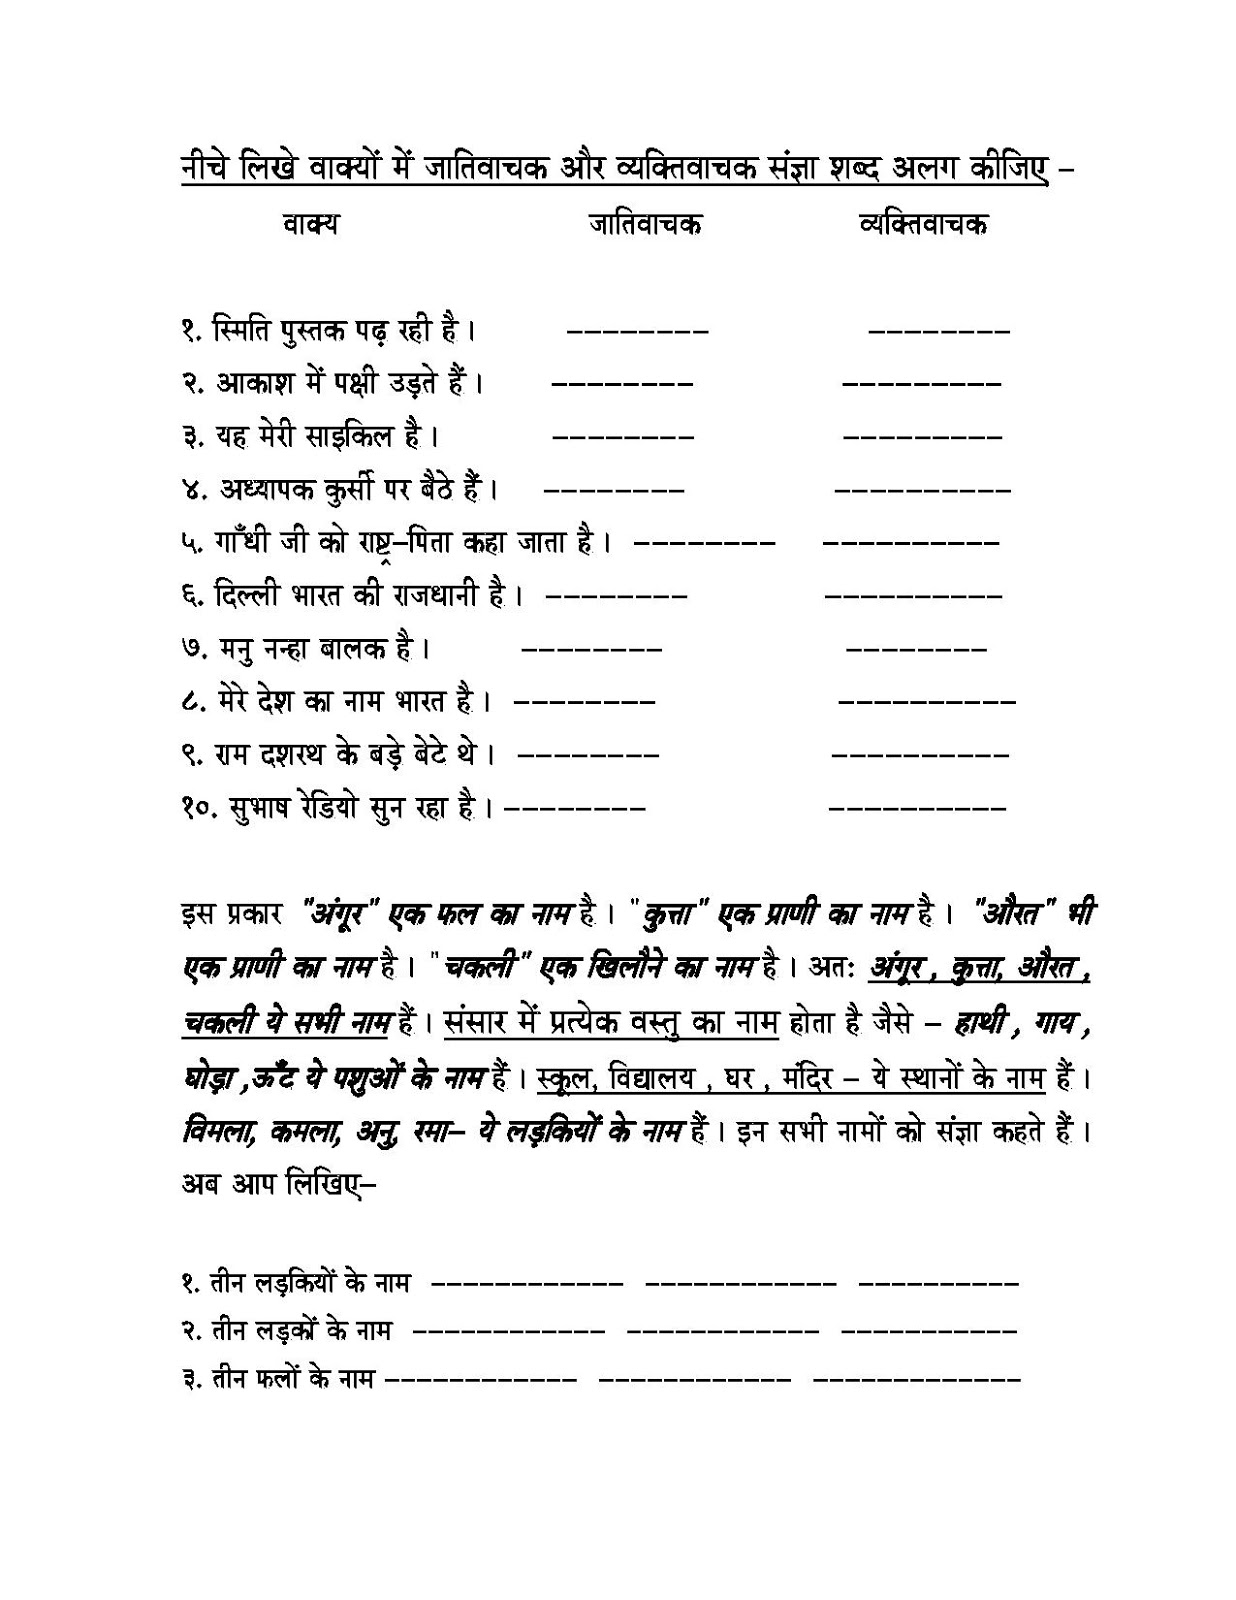 hindi grammar work sheet collection for classes 5 6 7 8 noun work sheets for classes 3 4 5 6 and 7 with solutions answers